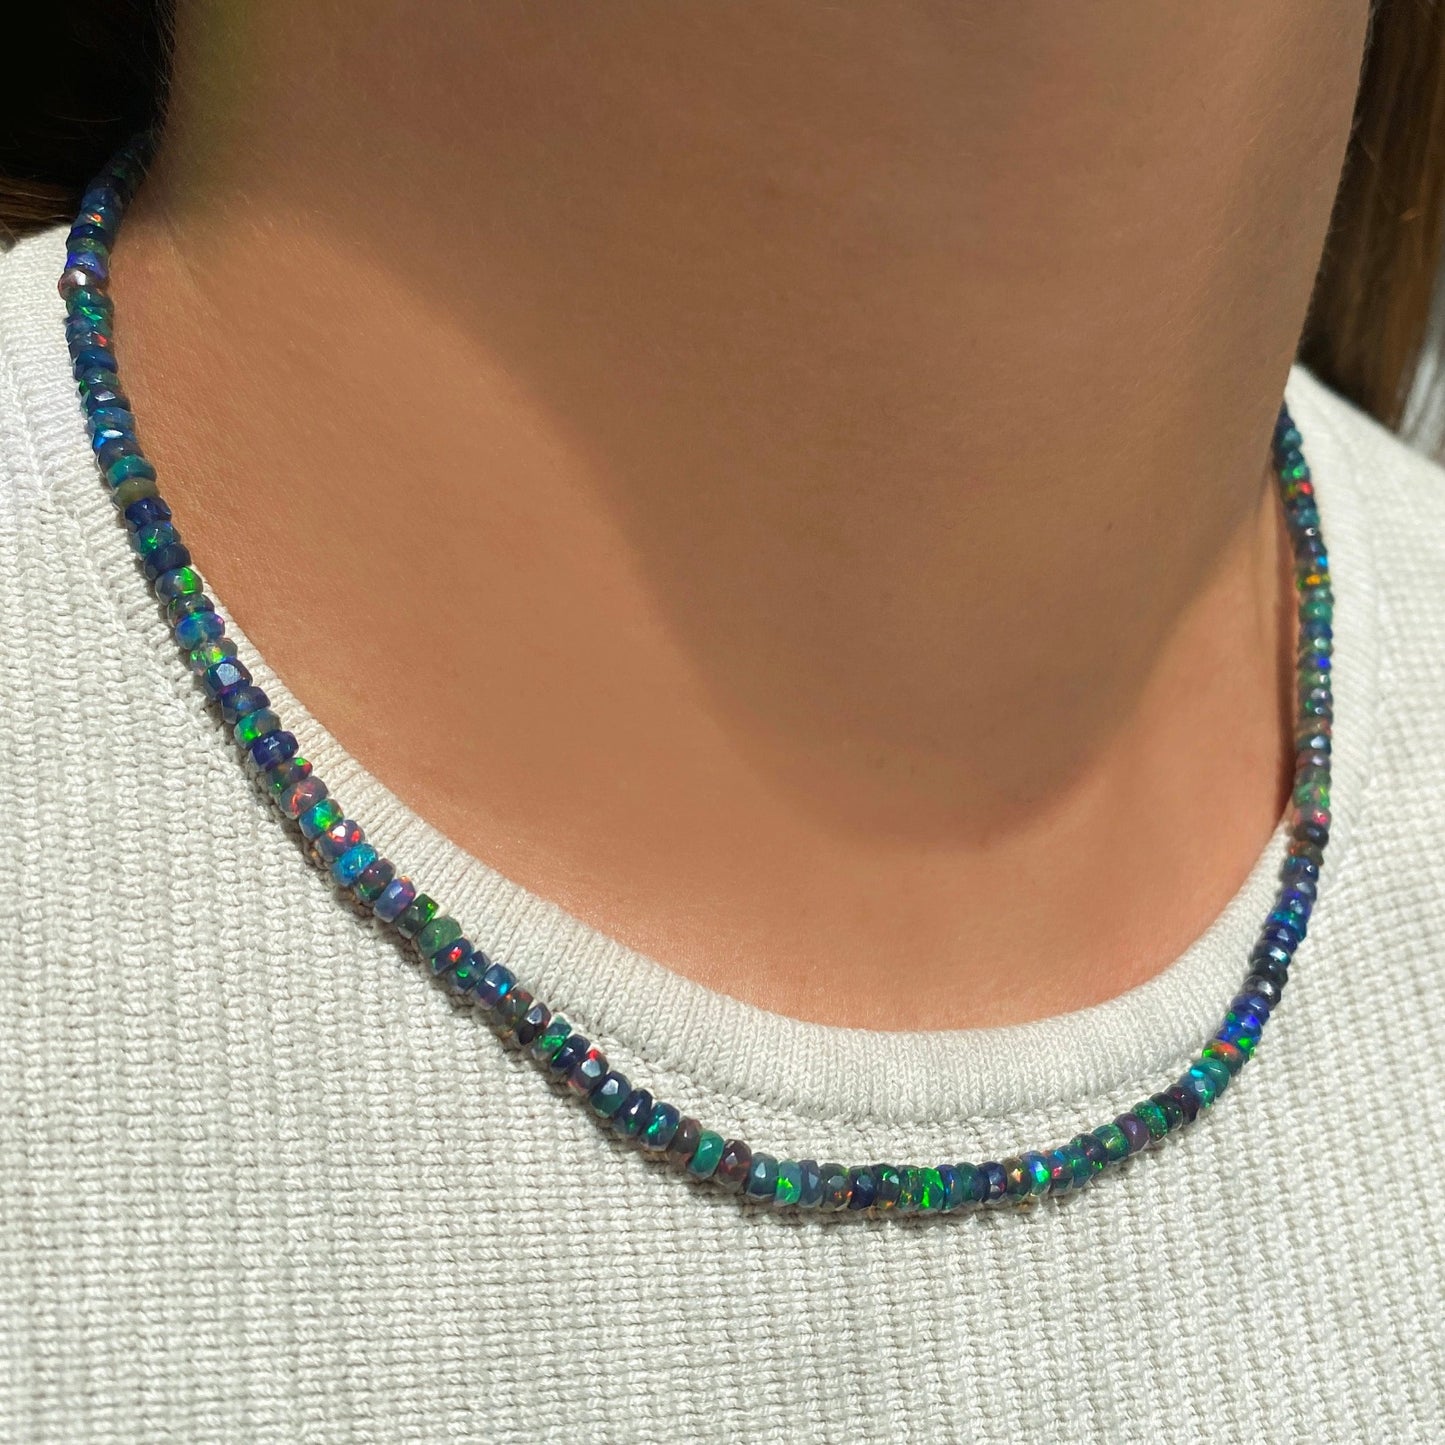 Shimmering beaded necklace made of faceted opals in shades of black, green, and blue on a gold linking ovals clasp. 